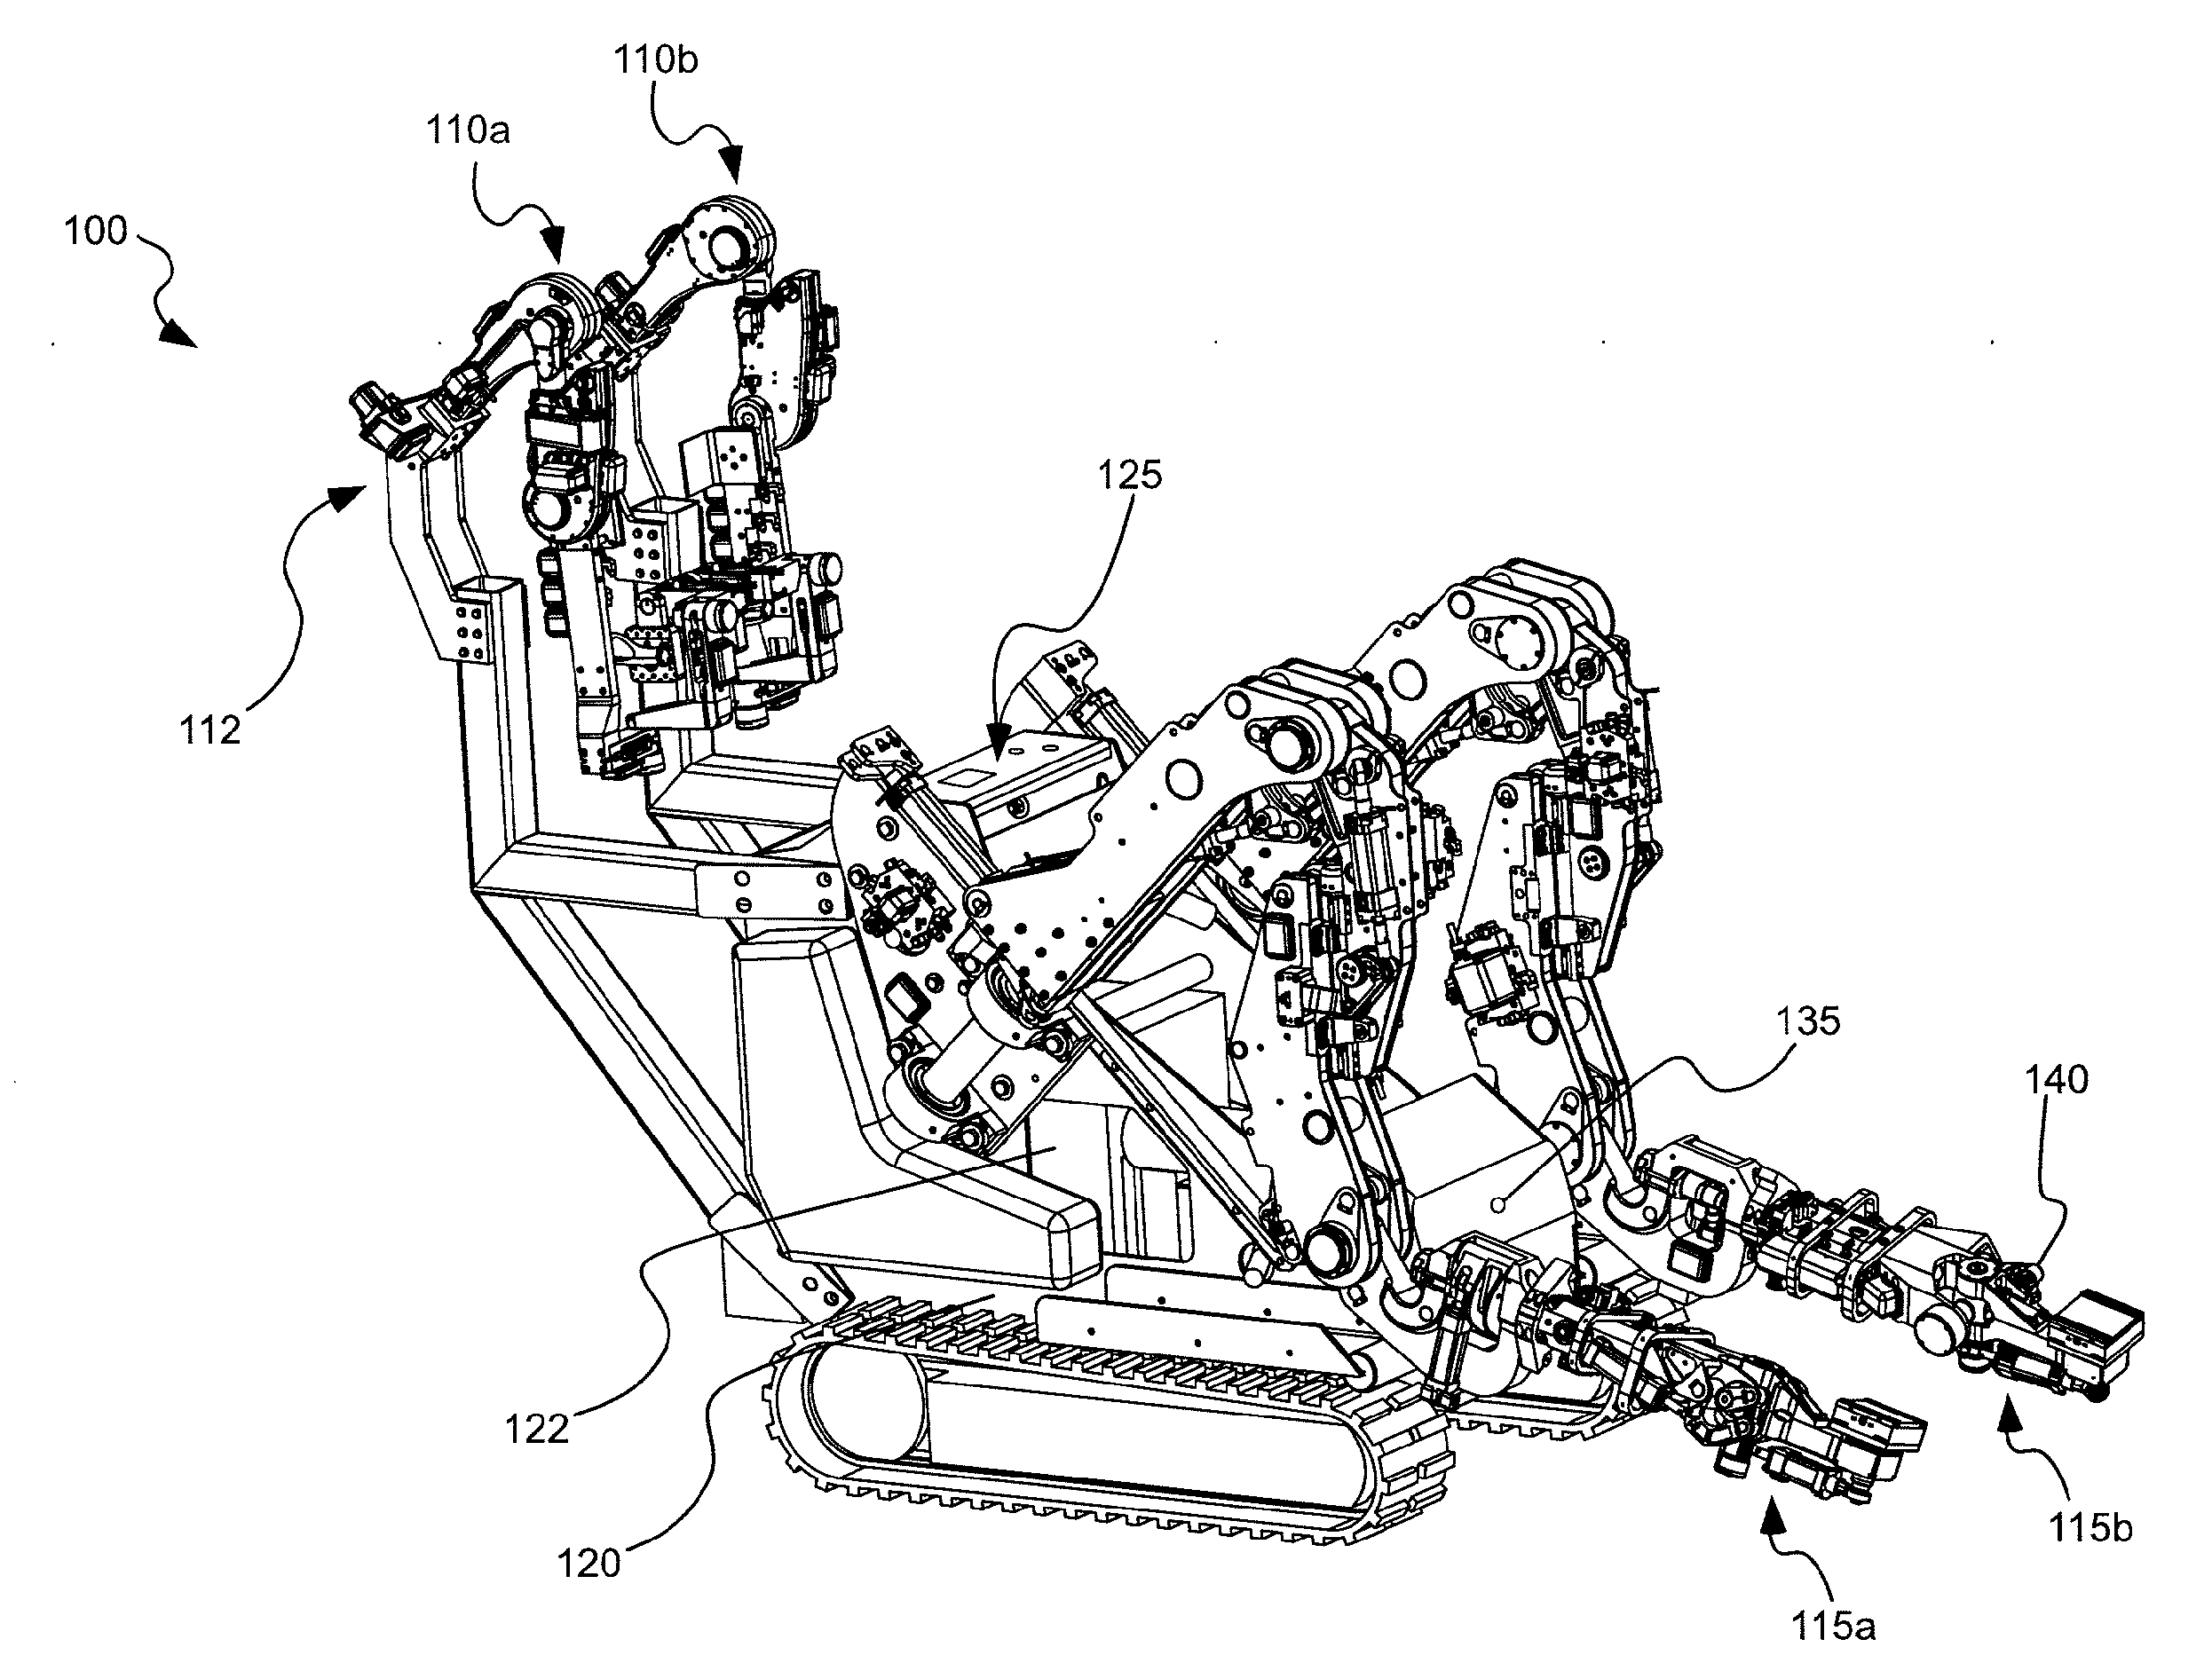 Multi-Degree of Freedom Torso Support For a Robotic Agile Lift System